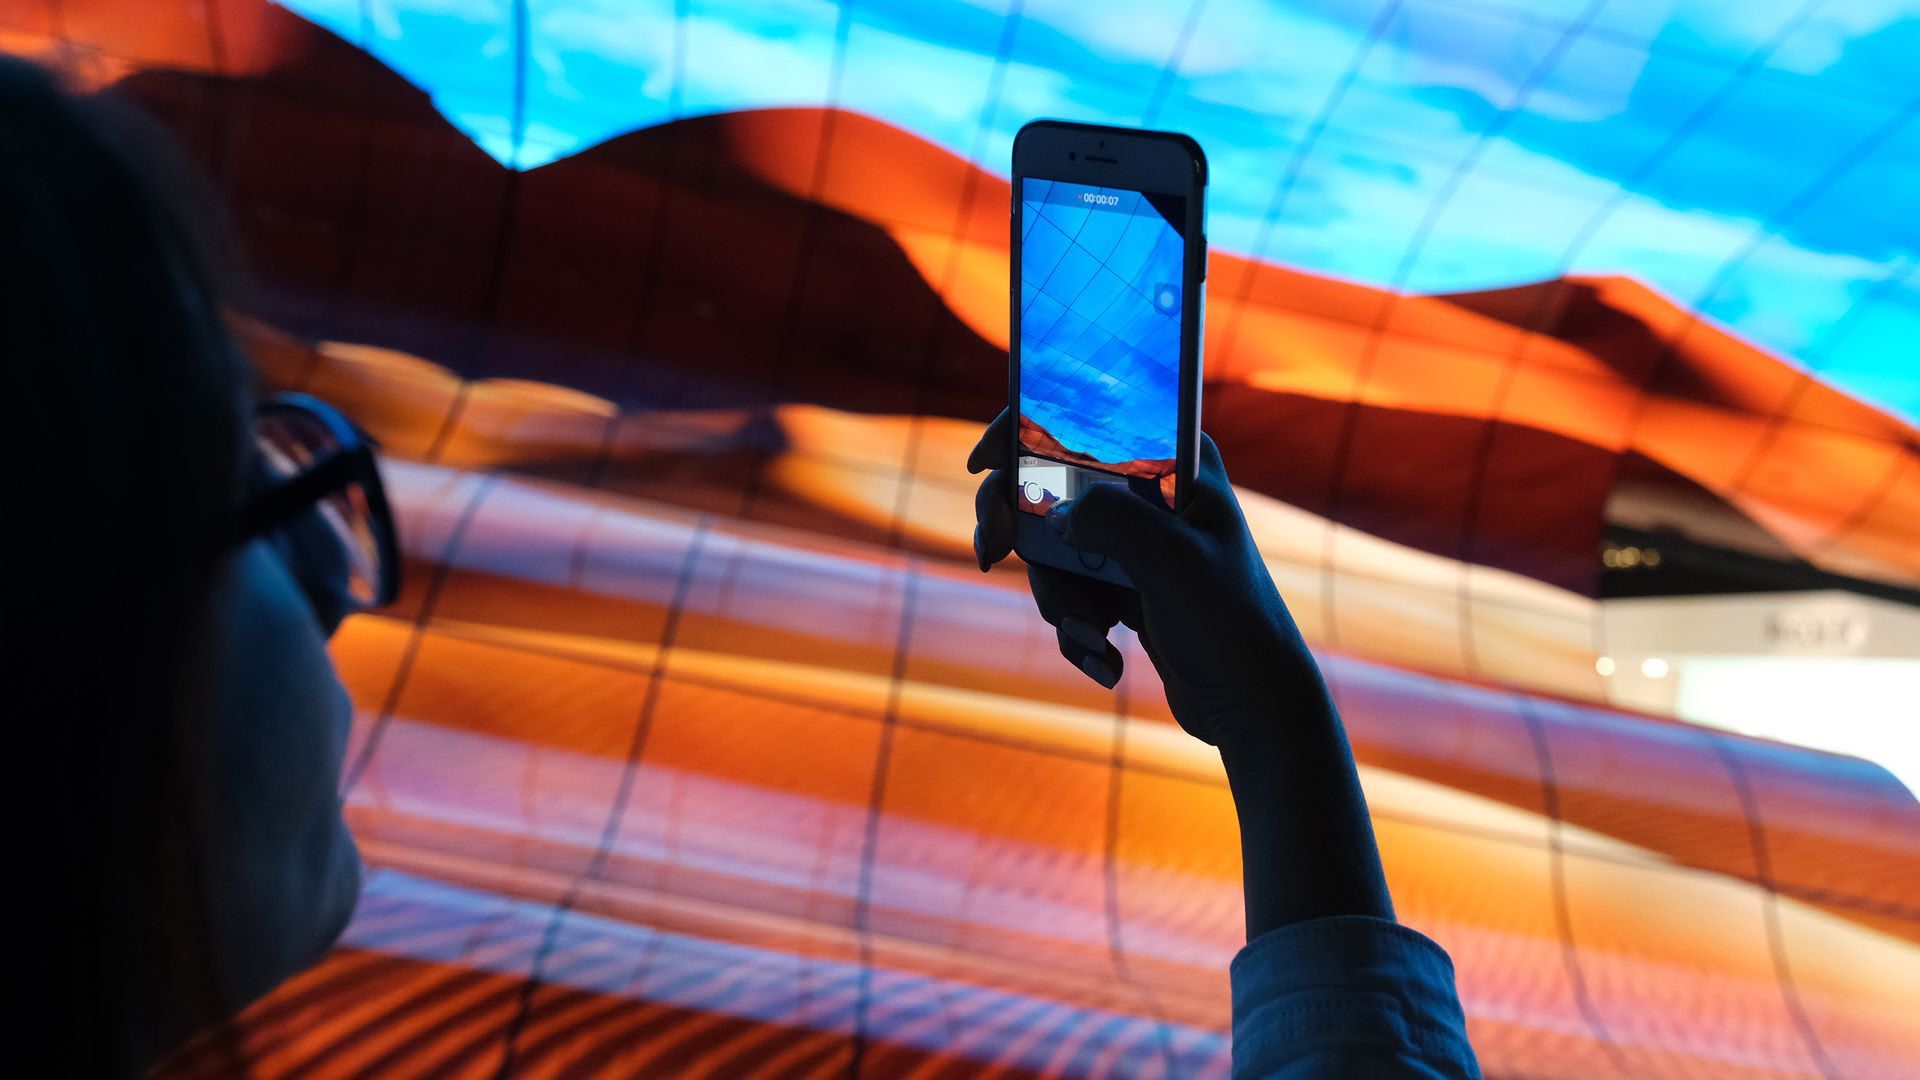 A visitor photographs a display of curved OLED TVs at the LG stand at the 2019 IFA home electronics and appliances trade fair. Photo: Sean Gallup/Getty Images